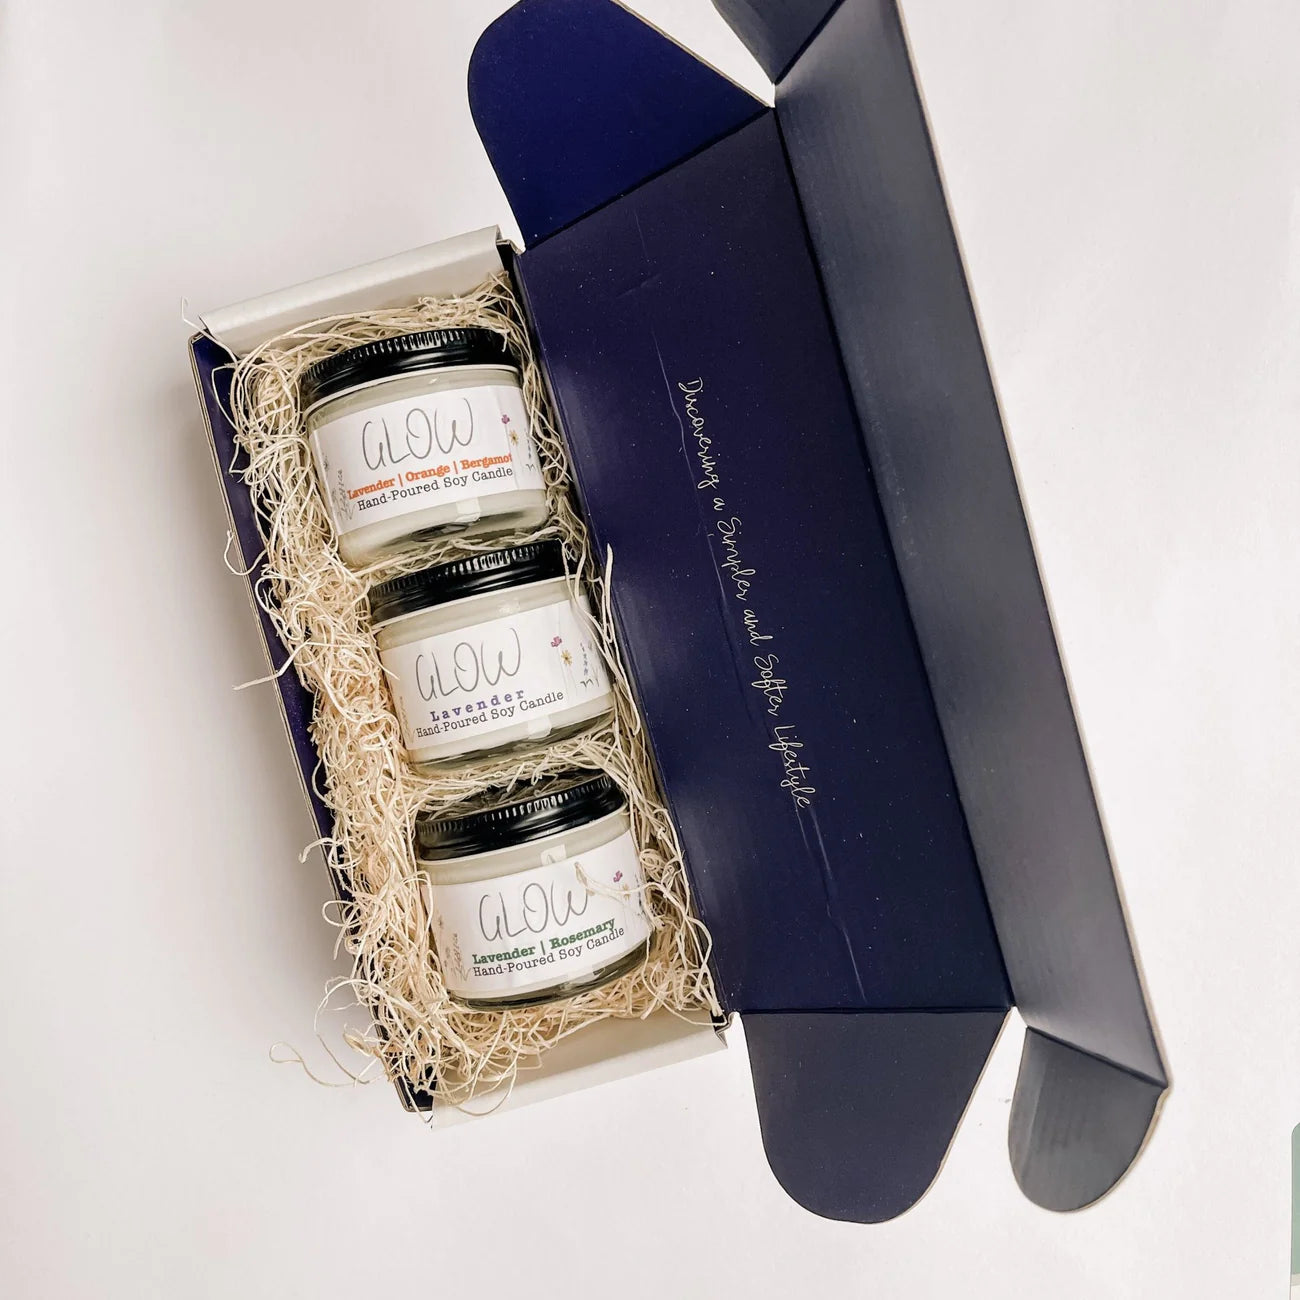 Lavender Luxuries: Organic Lavender Candles and Home Fragrances for Special Occasions